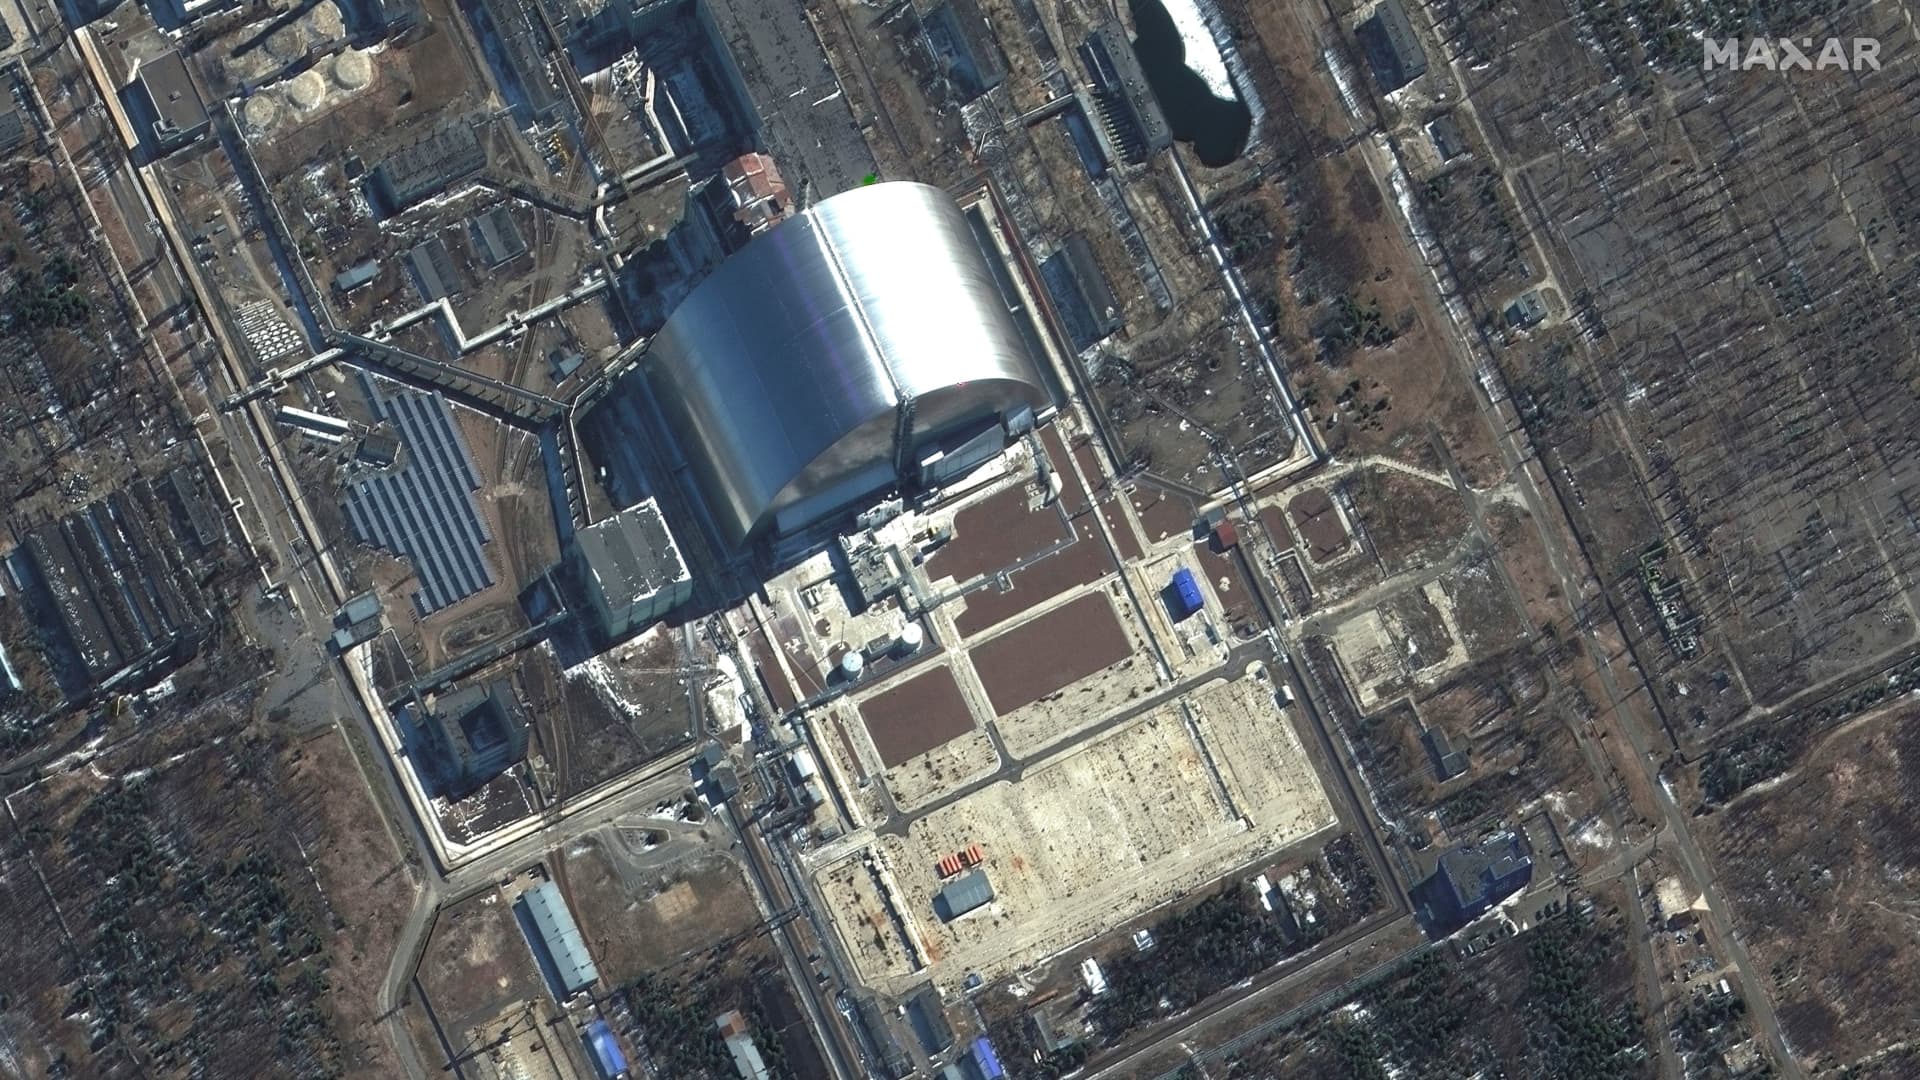 A satellite image shows a closer view of sarcophagus at Chernobyl, amid Russia's invasion of Ukraine, Ukraine, March 10, 2022.